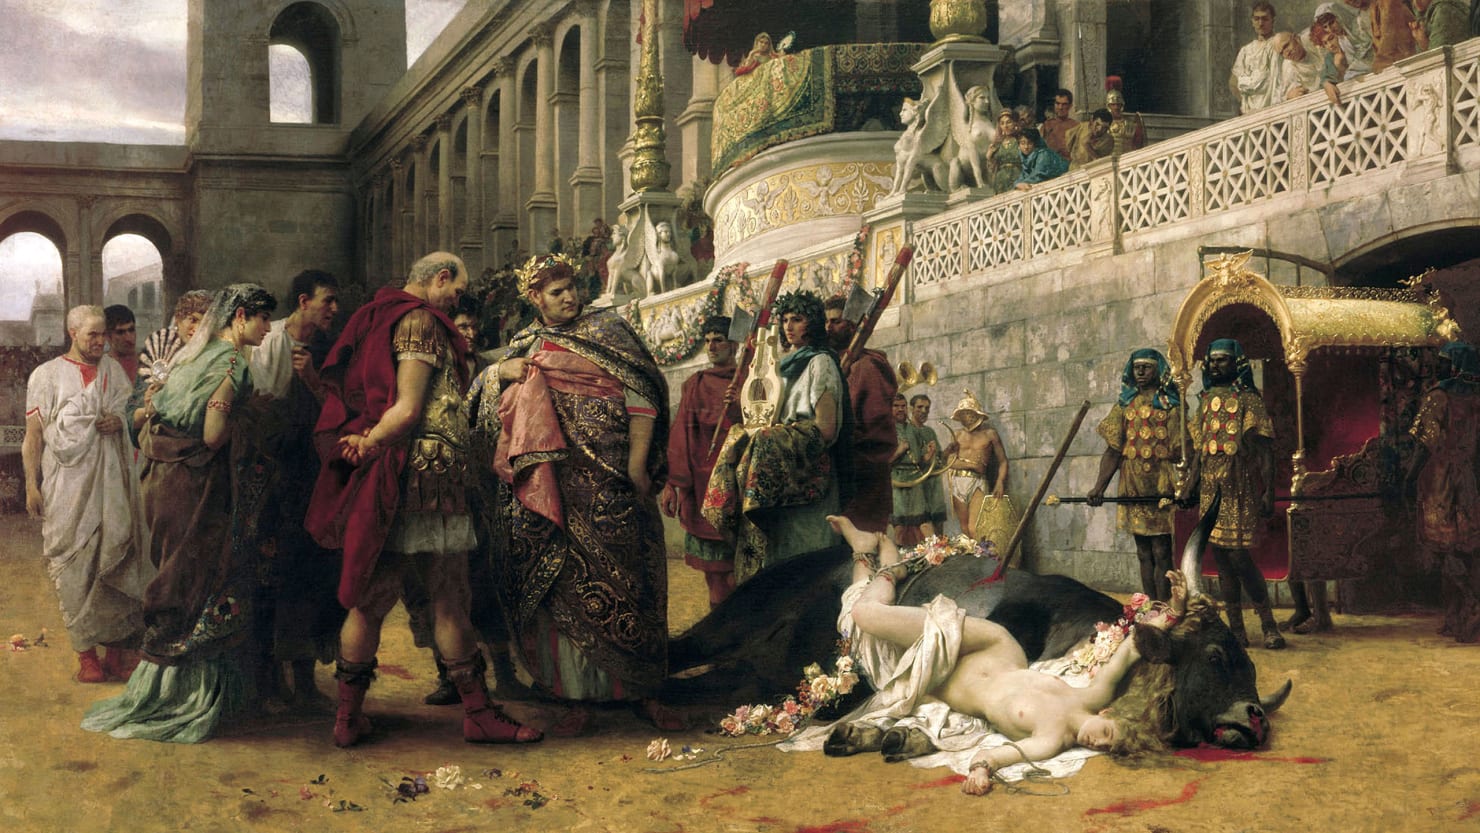 Did Christian Historians Exaggerate Persecution by the Romans?